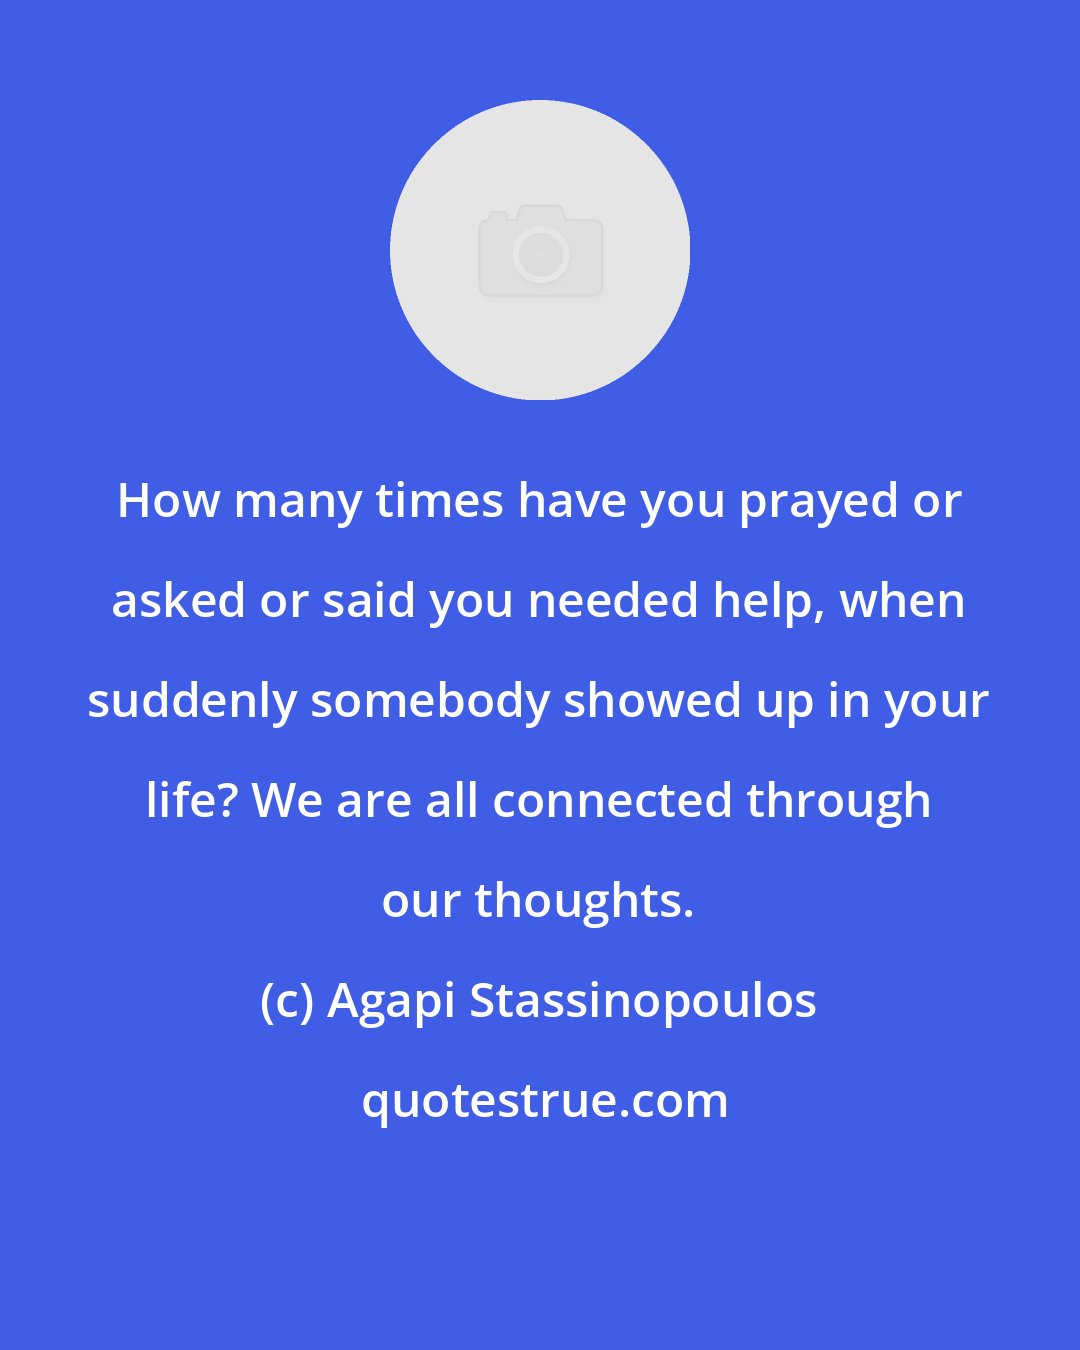 Agapi Stassinopoulos: How many times have you prayed or asked or said you needed help, when suddenly somebody showed up in your life? We are all connected through our thoughts.